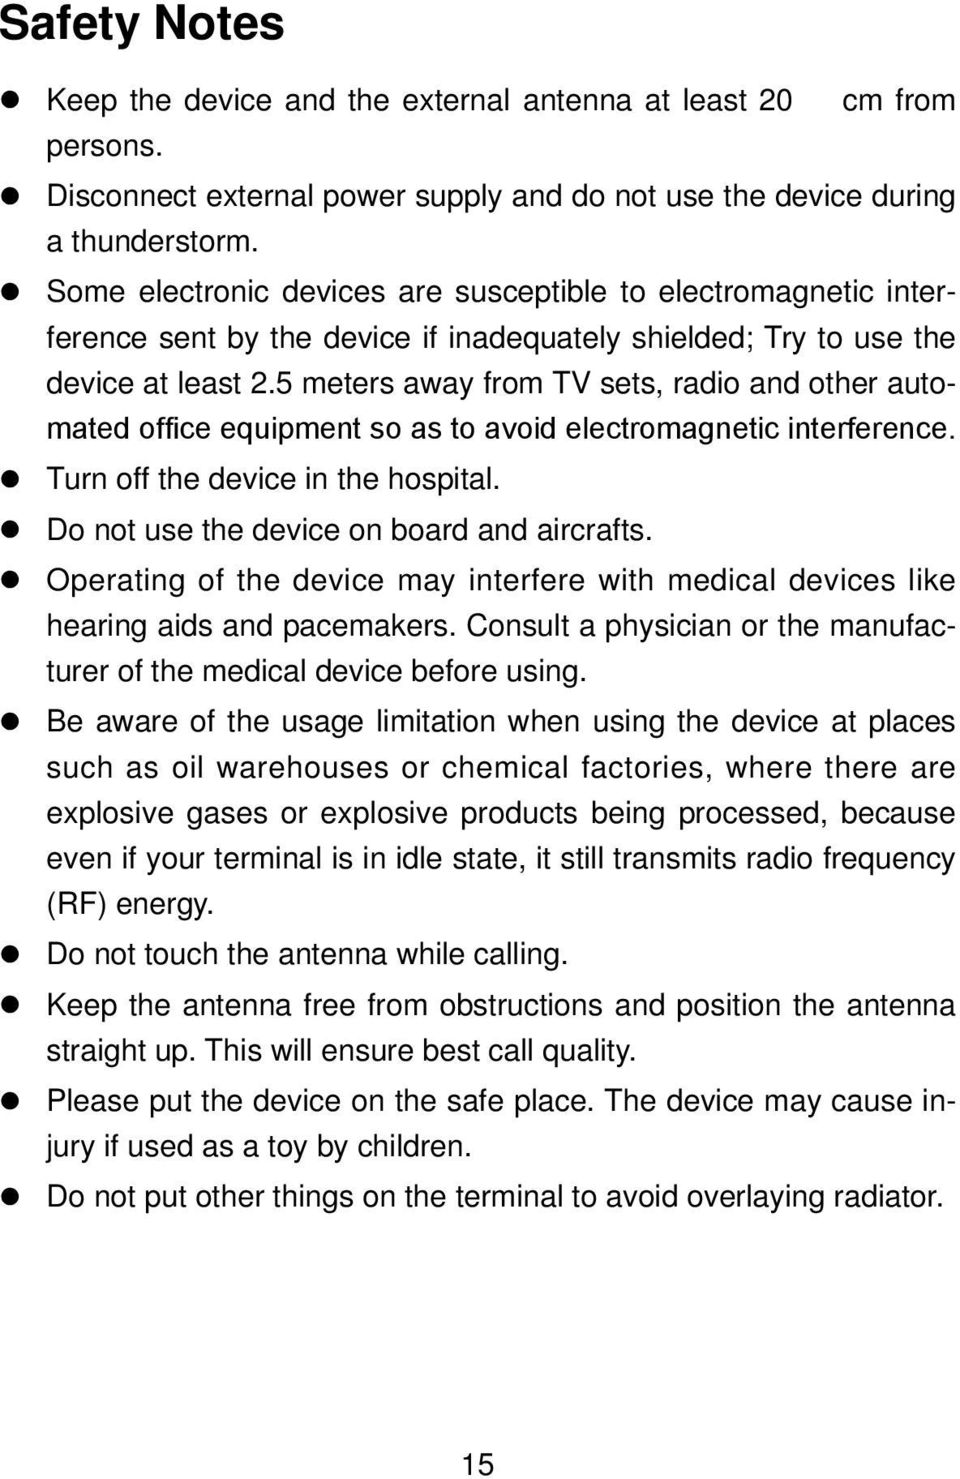 5 meters away from TV sets, radio and other automated office equipment so as to avoid electromagnetic interference. Turn off the device in the hospital. Do not use the device on board and aircrafts.